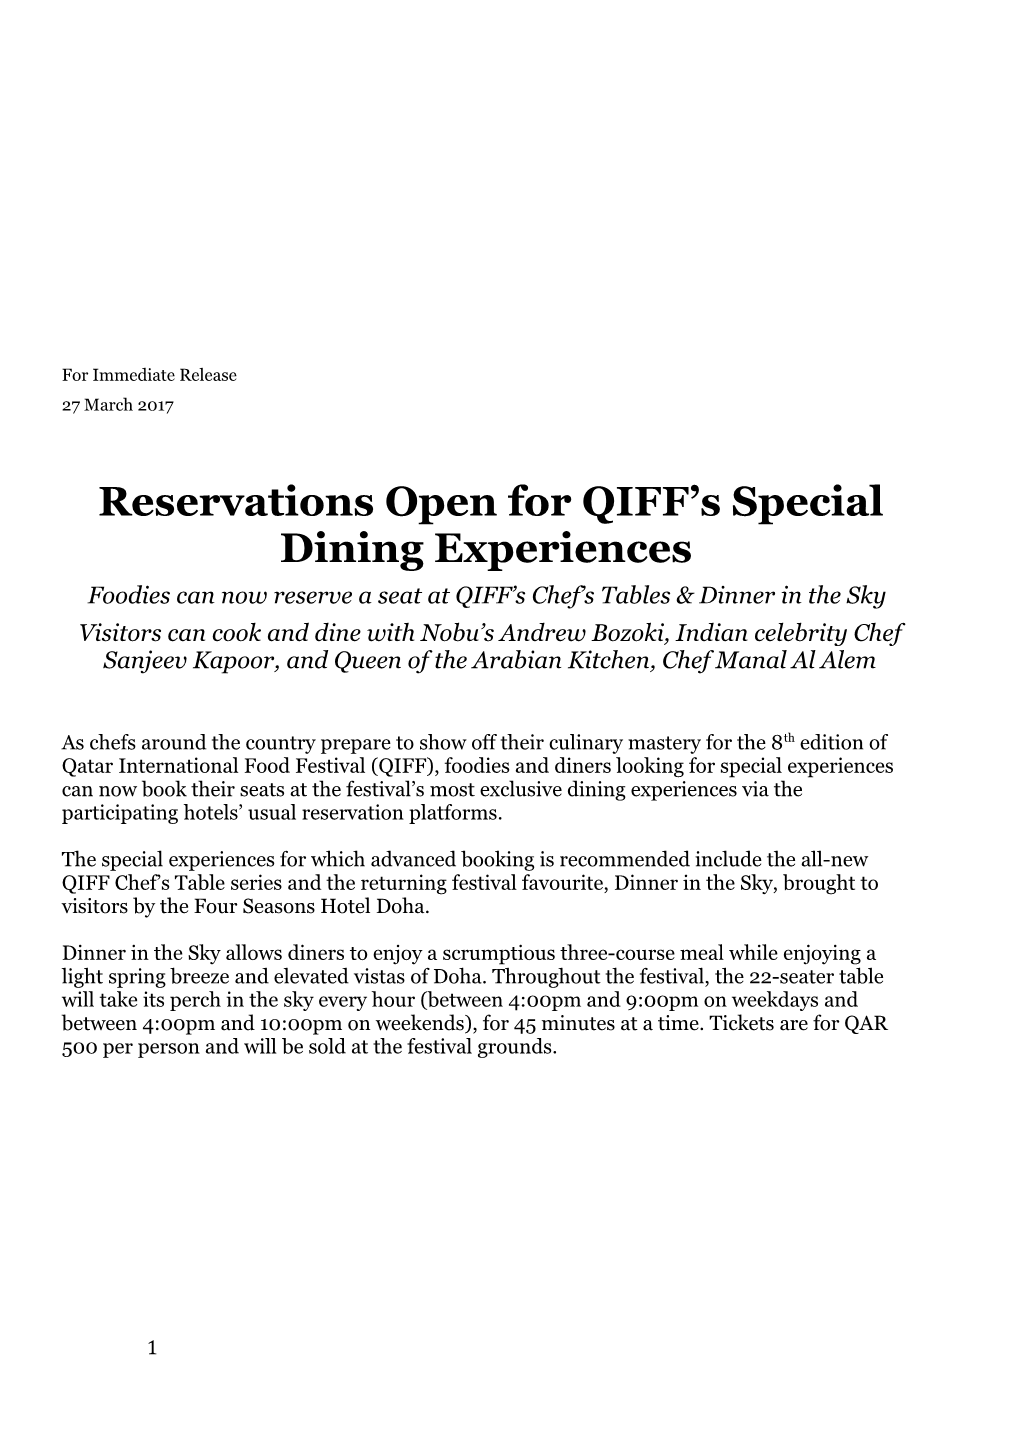 Reservations Open for QIFF S Special Diningexperiences